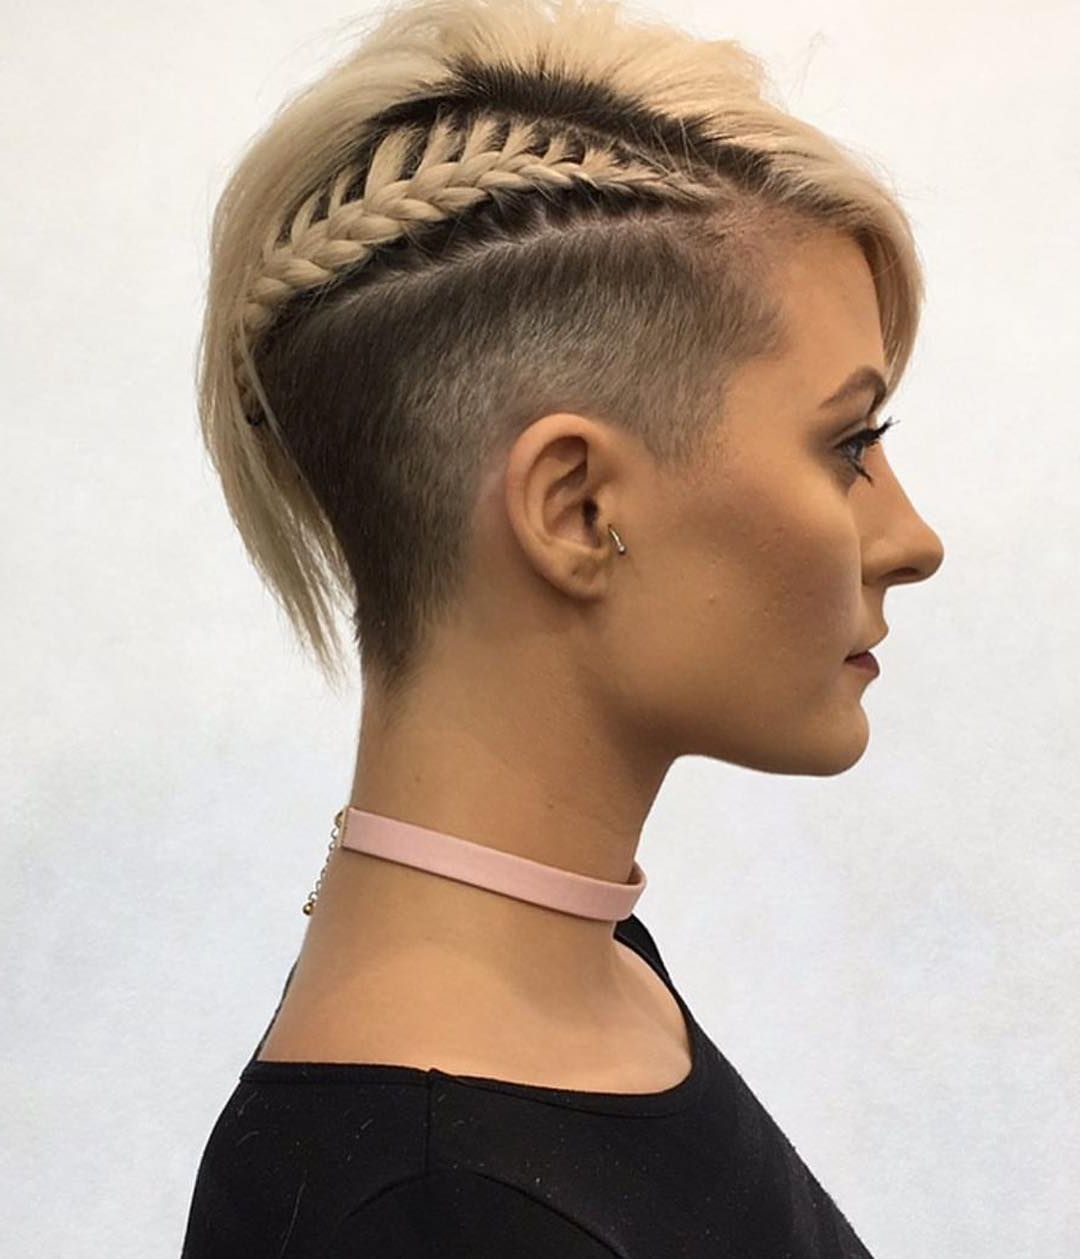 10 Chic Shaved Haircuts For Short Hair – Women Short Hairstyles 2018 Throughout Short Haircuts Edgy (View 10 of 25)